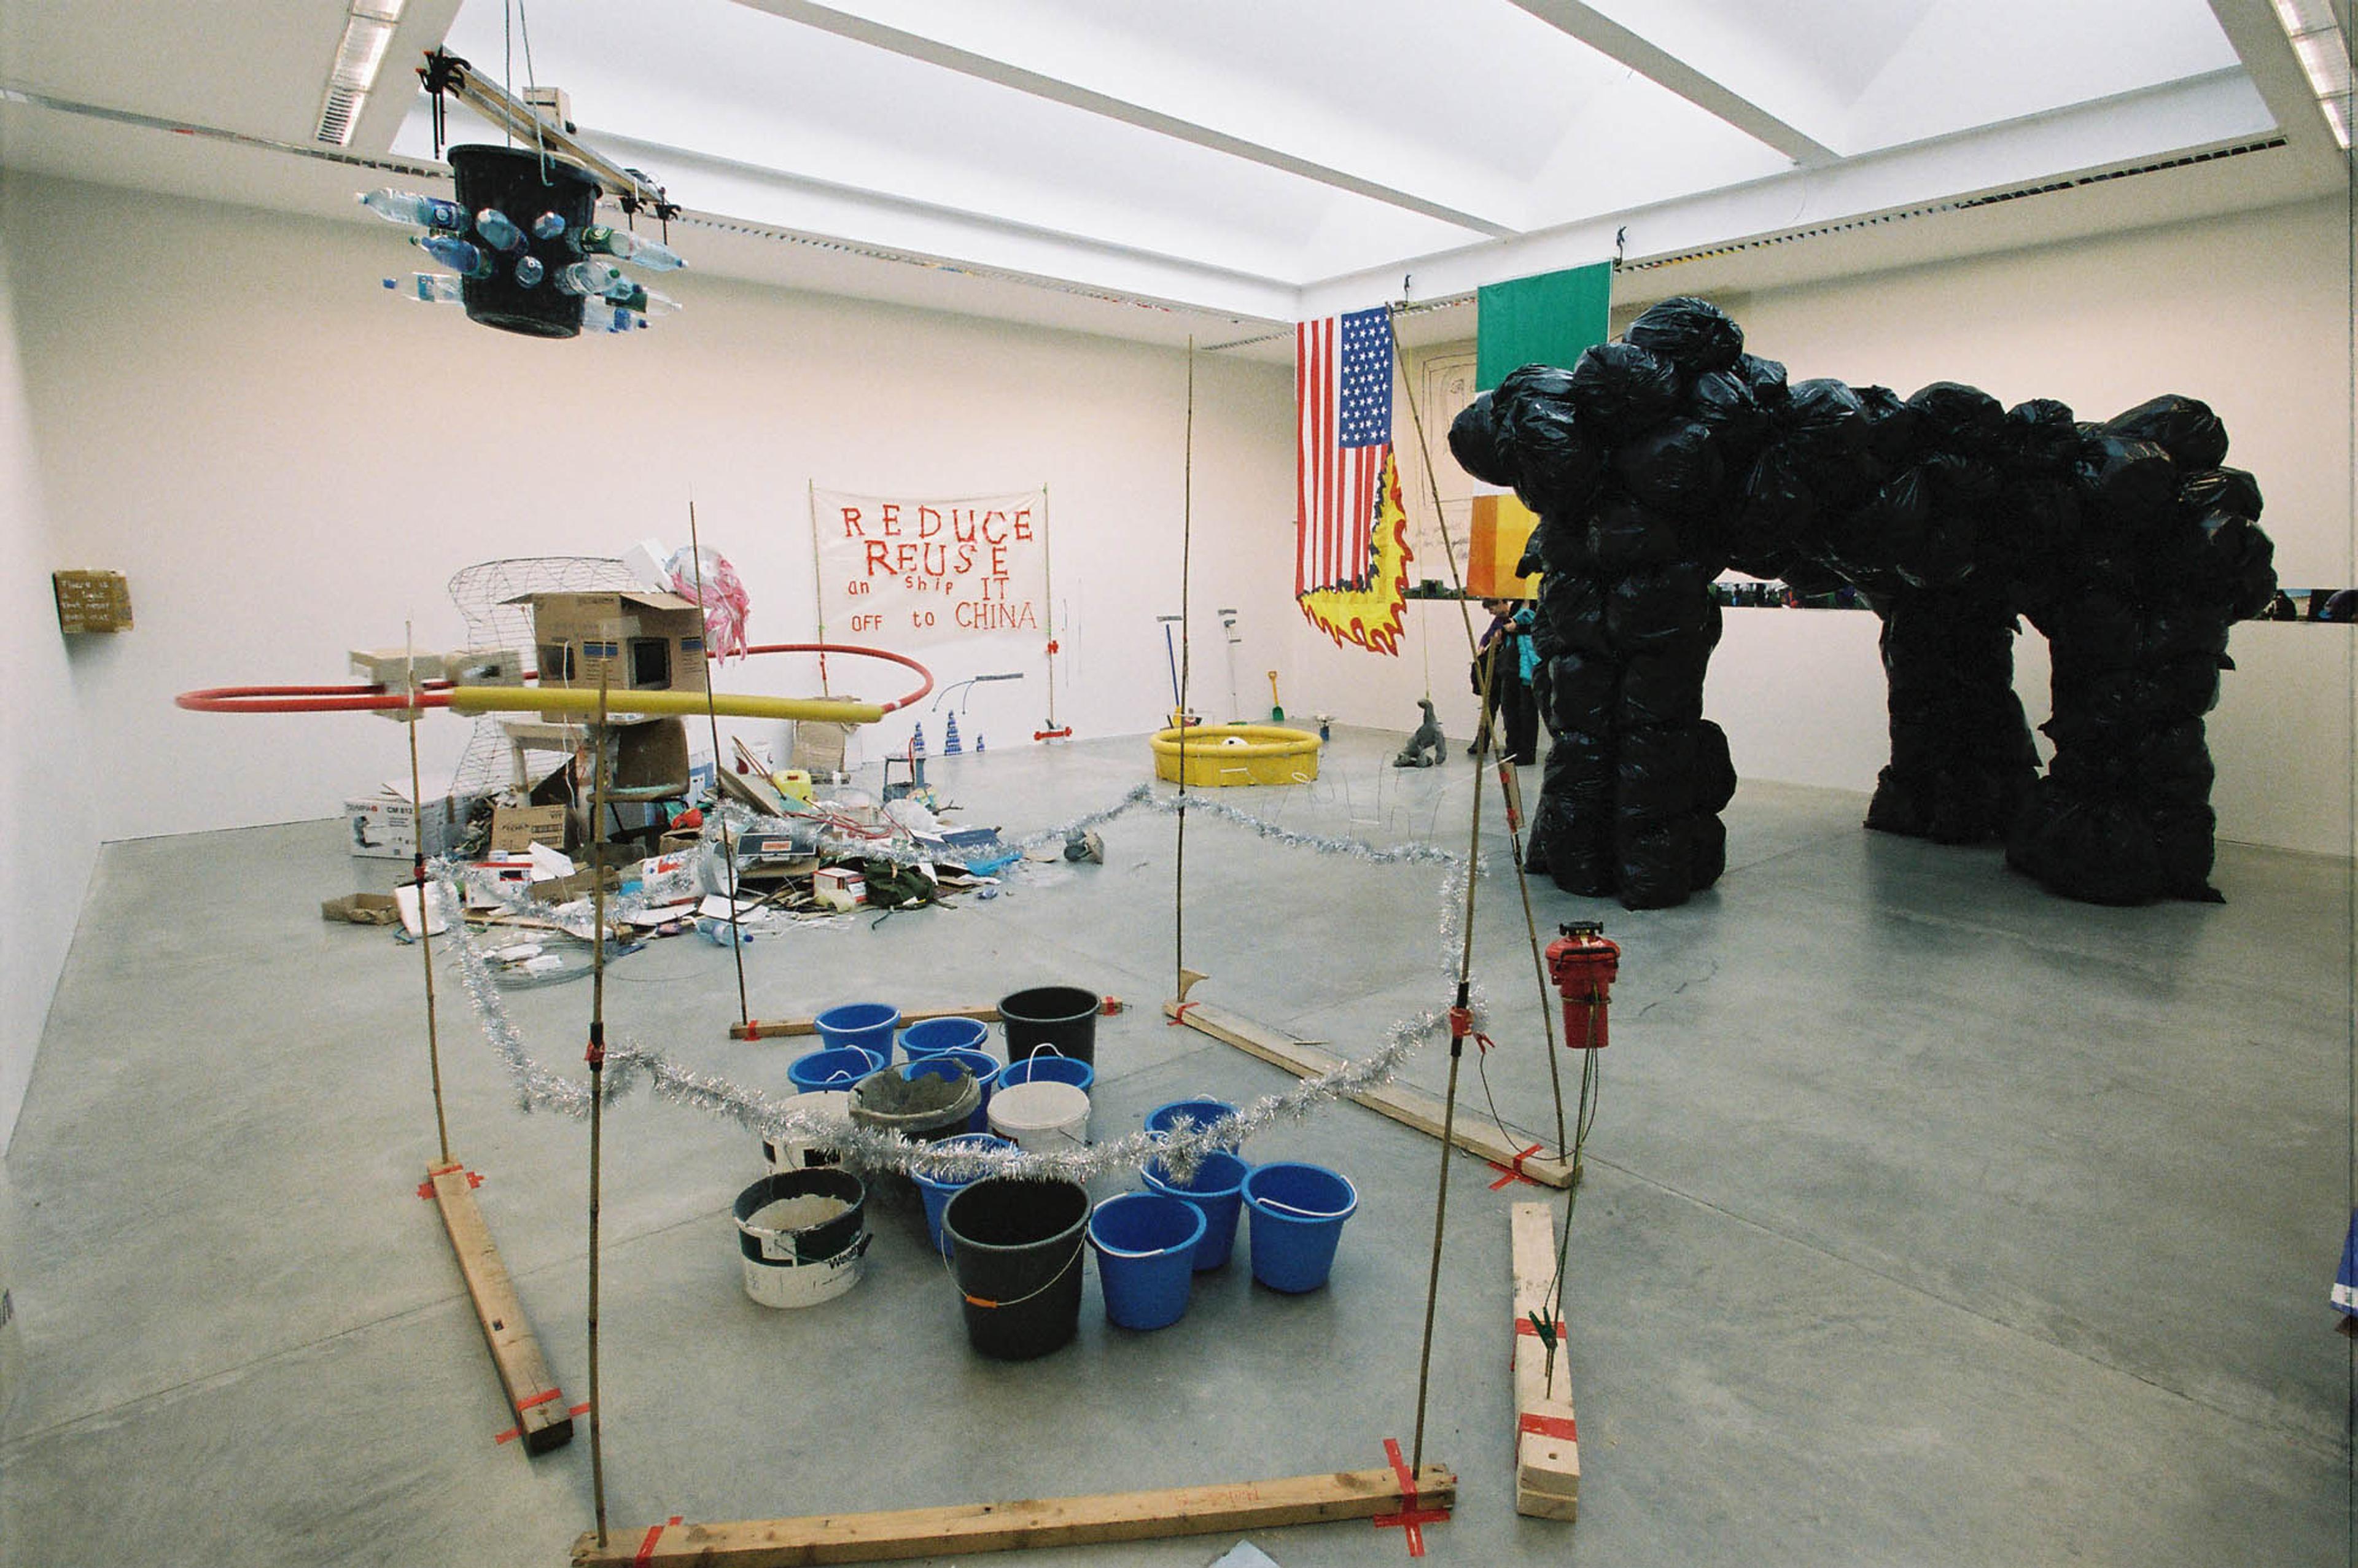 (2006) Nevan Lahart, Every Man, Woman and Child for themselves and God against All, 2006, mixed media installation.